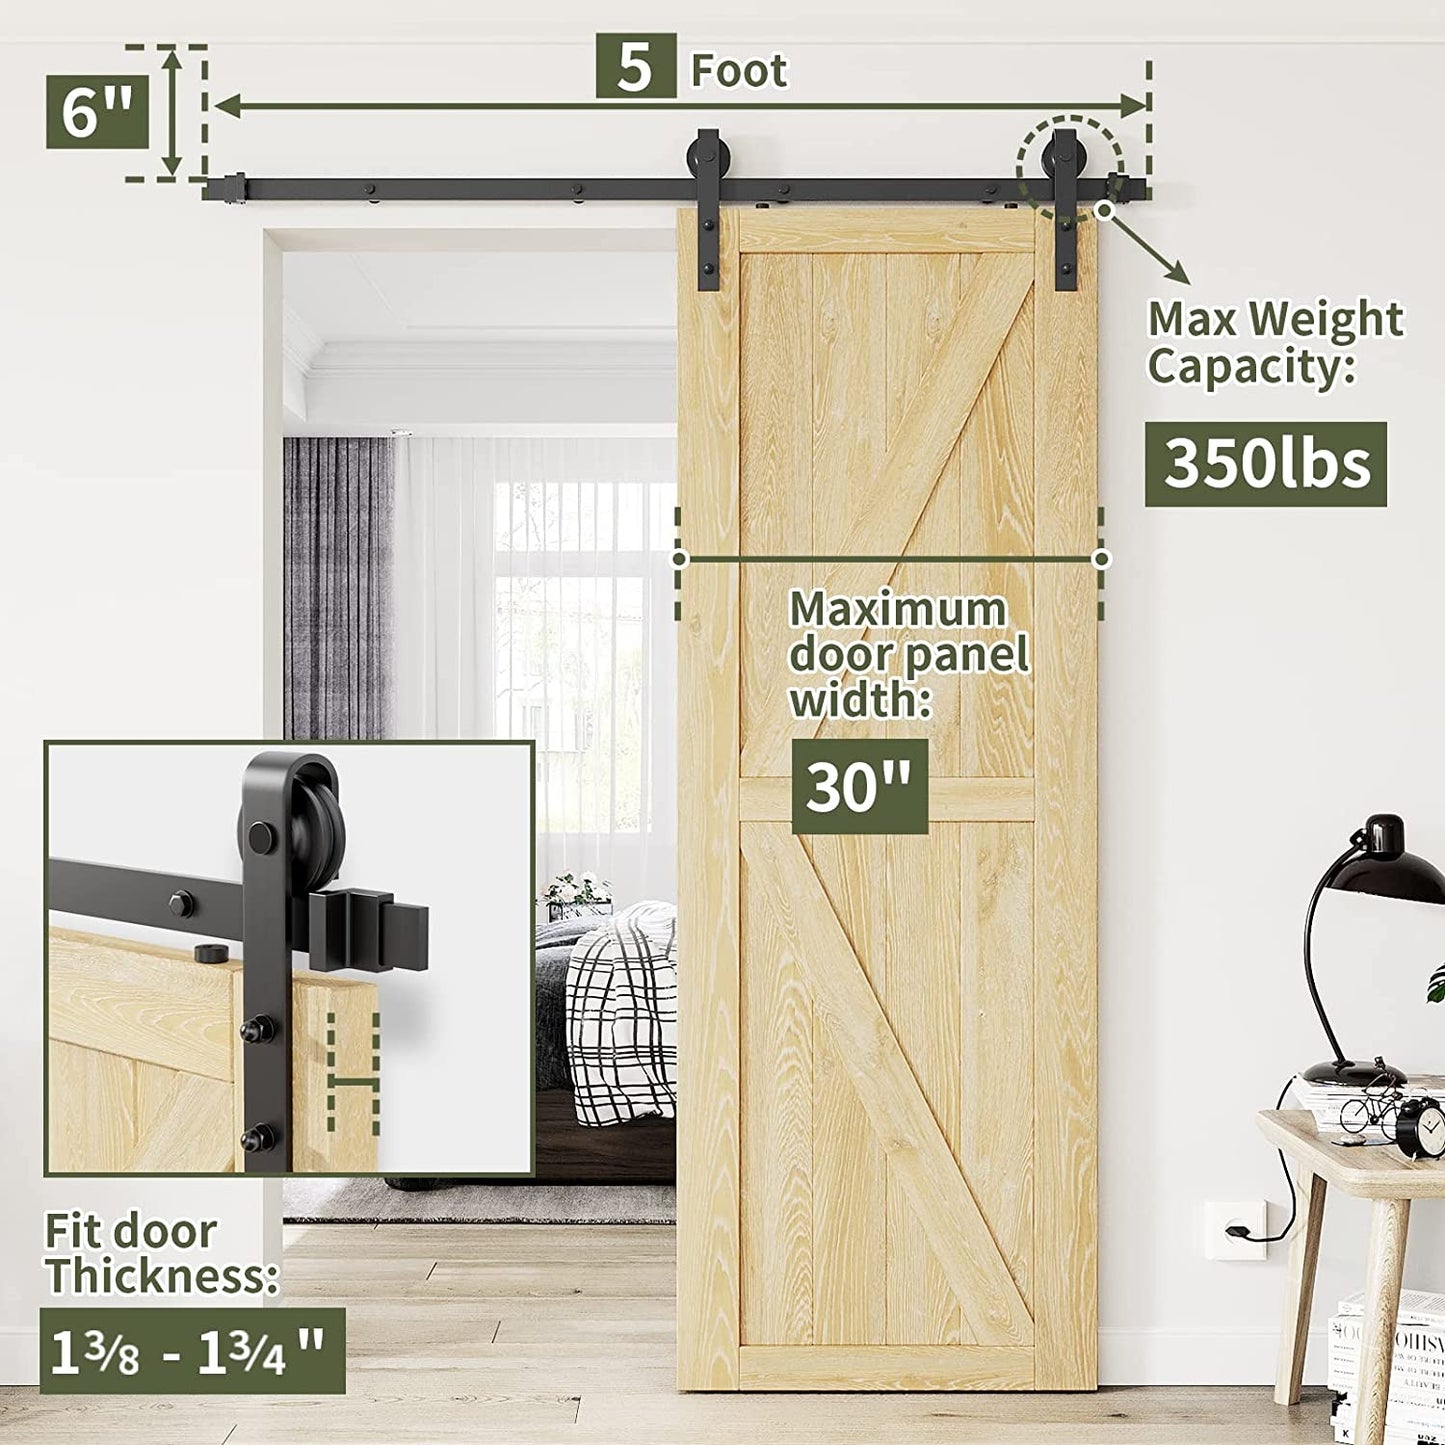 HomLux 5ft Heavy Duty Sturdy Sliding Barn Door Hardware Kit Single Door - Smoothly and Quietly - Simple and Easy to Install - Fit 1 3/8-1 3/4 inch Thickness Door Panel